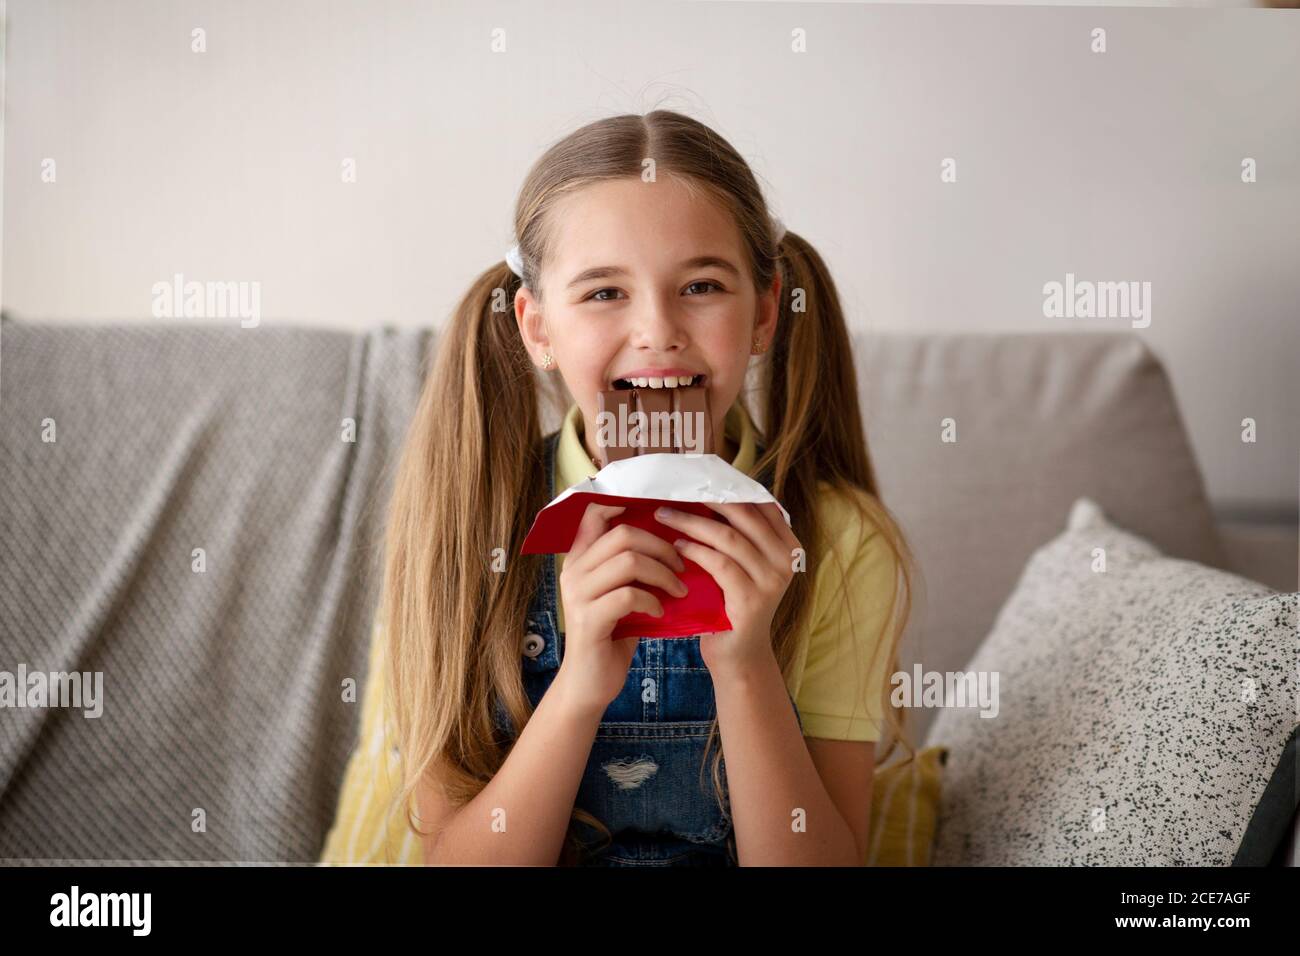 Lady eating chocolate sitting on a couch at home Stock Photo